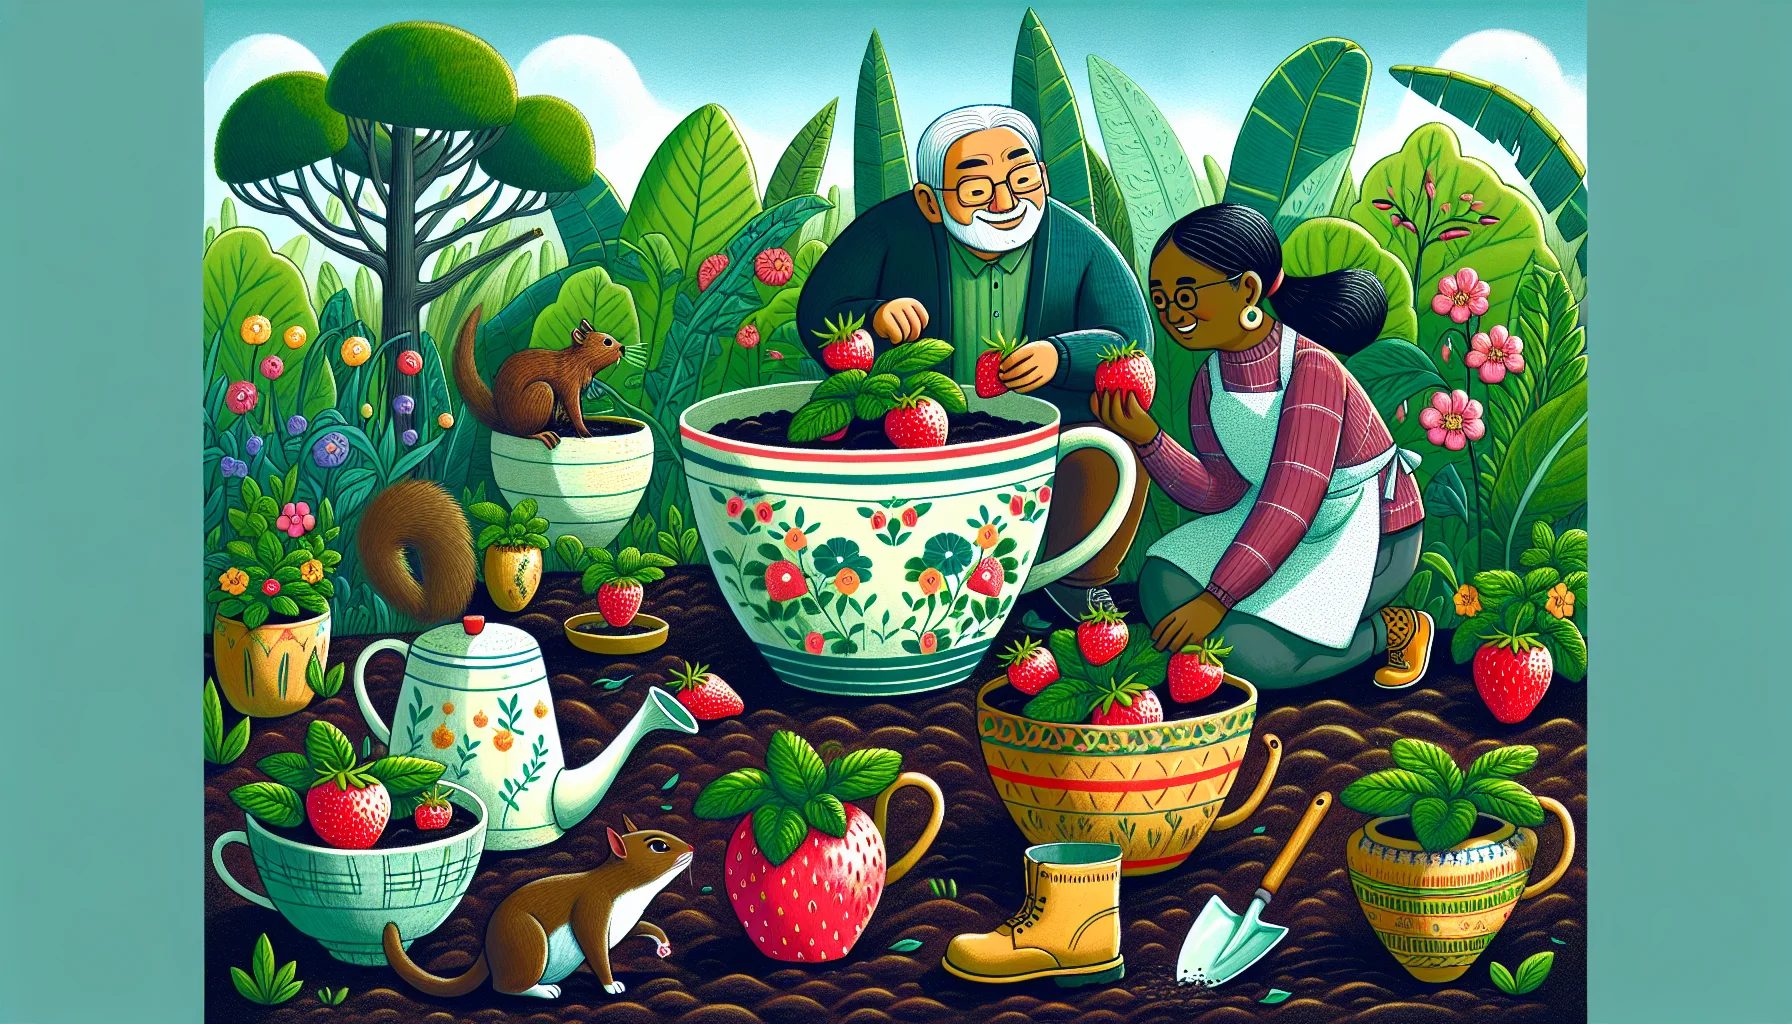 Illustrate a humorous scene of an elderly Asian man and a young Black woman gardening together. They are planting strawberries in uniquely shaped flower pots, designed like over-sized teacups and boots. The scene contains a playful vibe with vivid green foliage backdropped by a clear blue sky. A comedic twist is implied as a South Asian squirrel tries stealing a ripe strawberry, while a Middle Eastern cat stealthily prepares to pounce on the squirrel. An array of richly colored strawberries contrast against the dark earth, making the scene delightful and inviting the viewers to relish the joys of gardening.